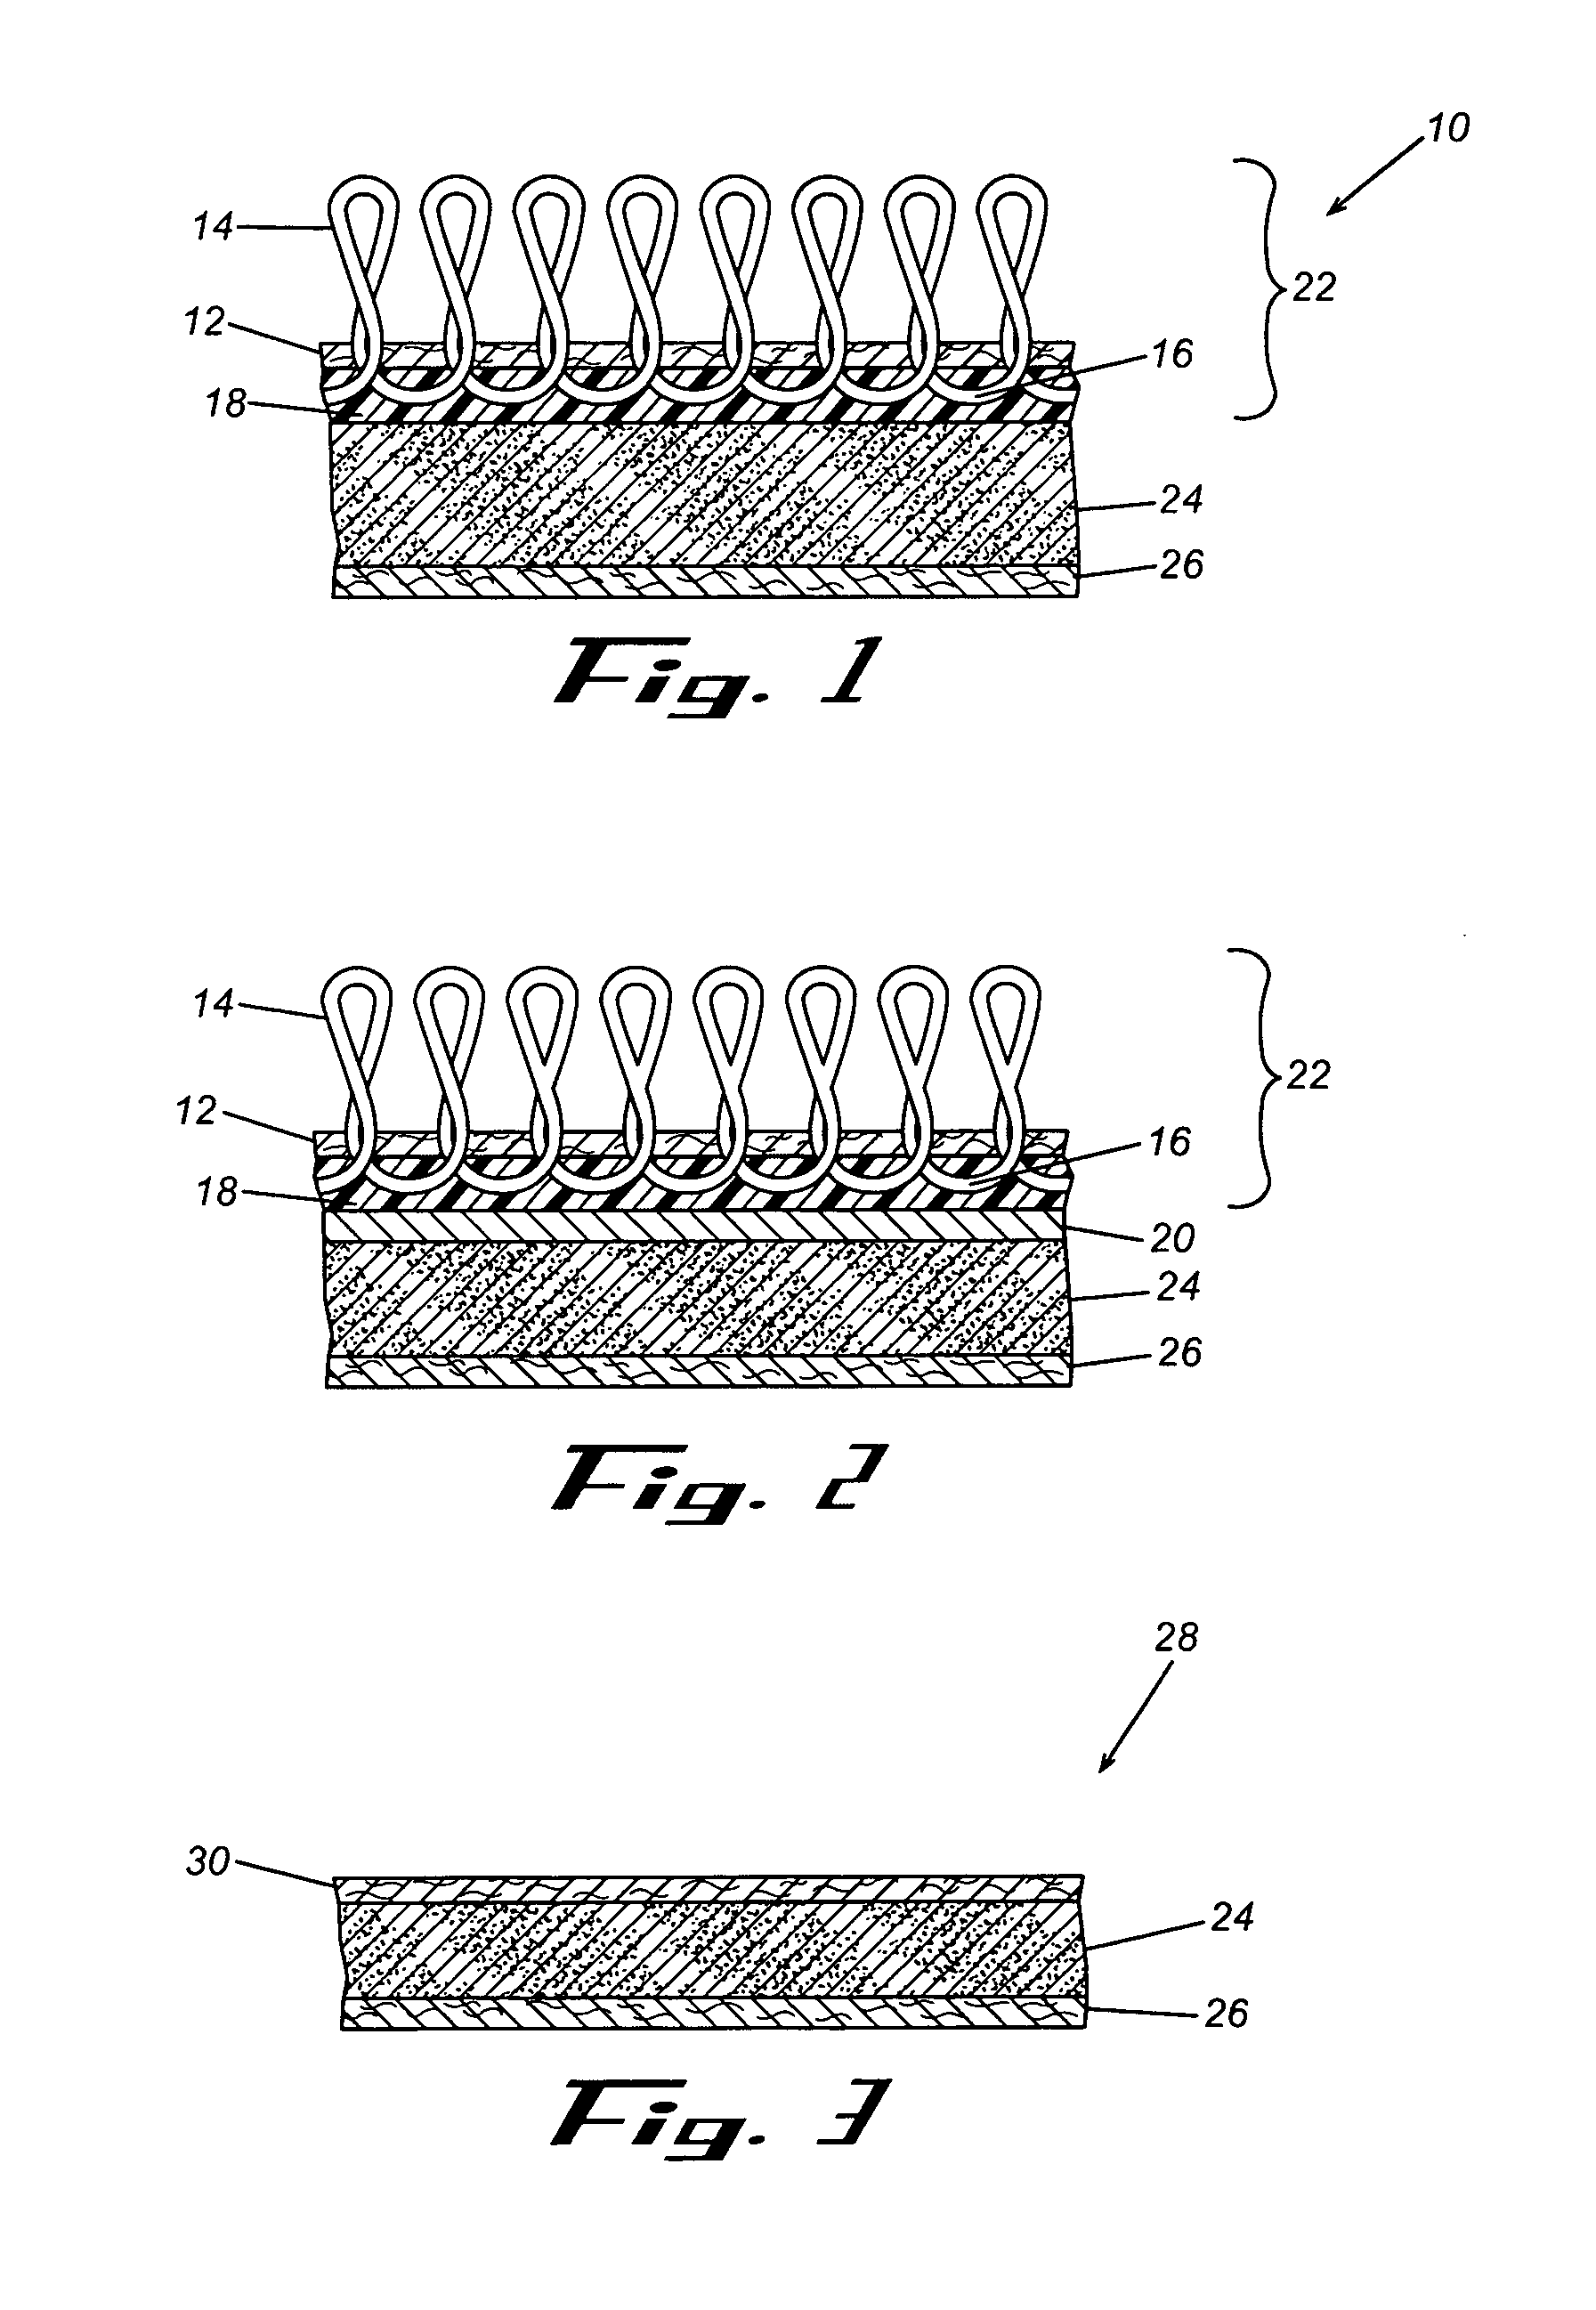 Floor covering product including recycled material and method of making same